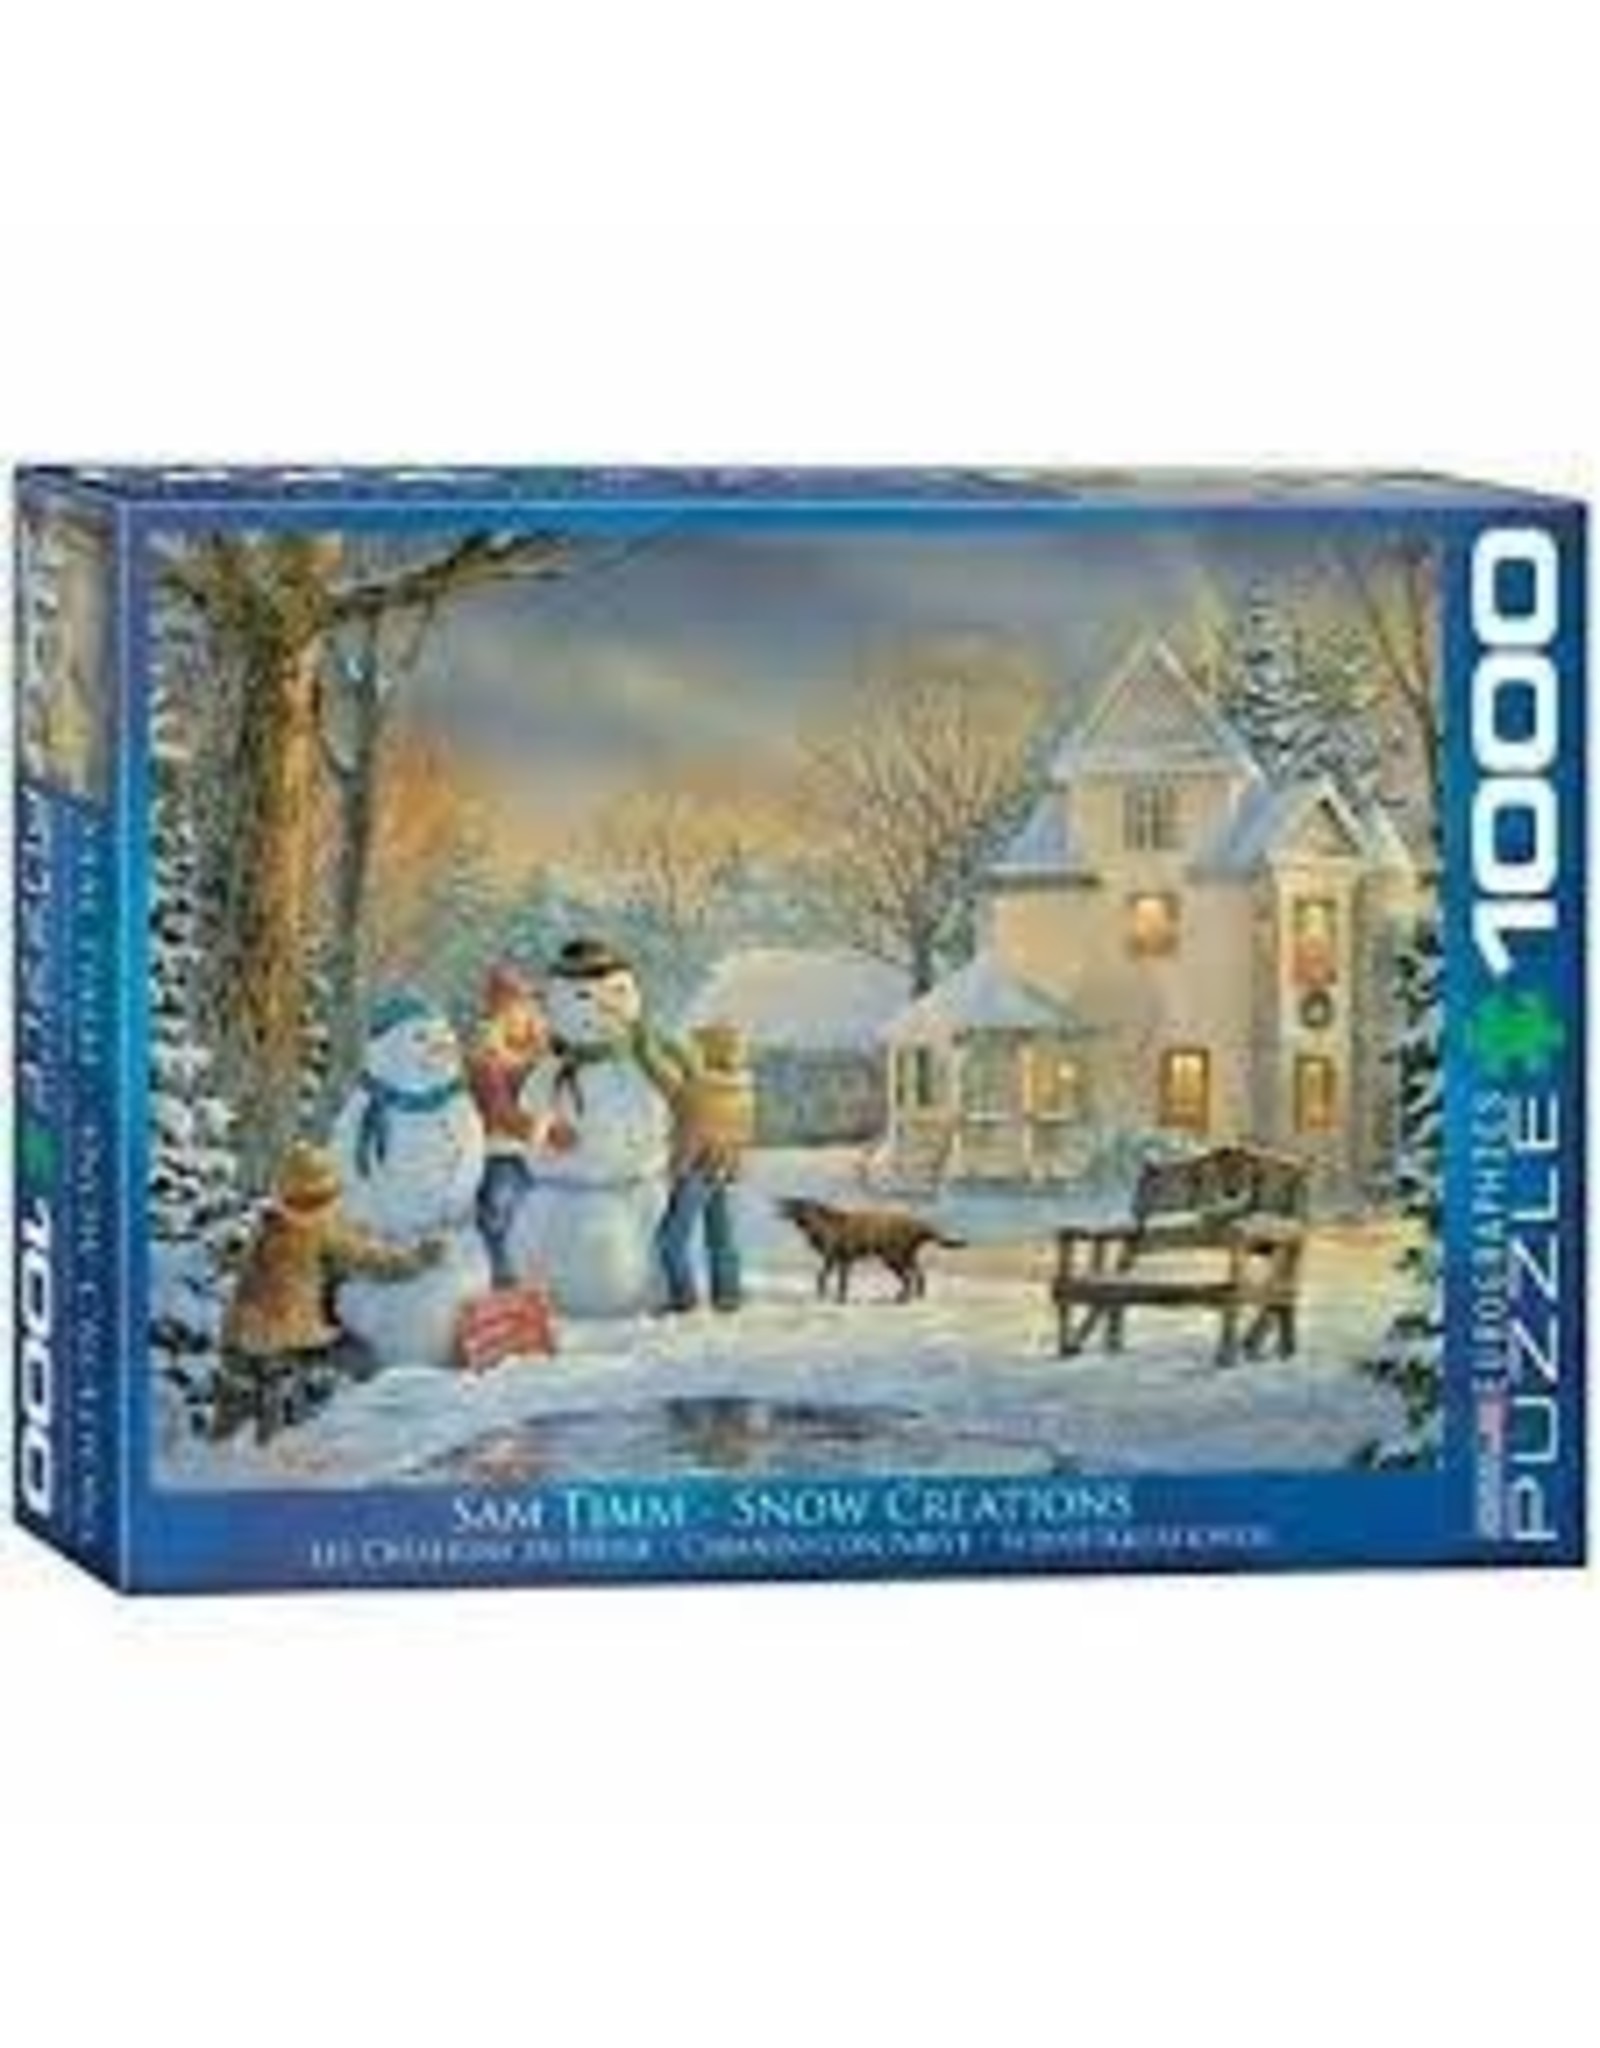 Snow Creations by Sam Timm 1000 pc